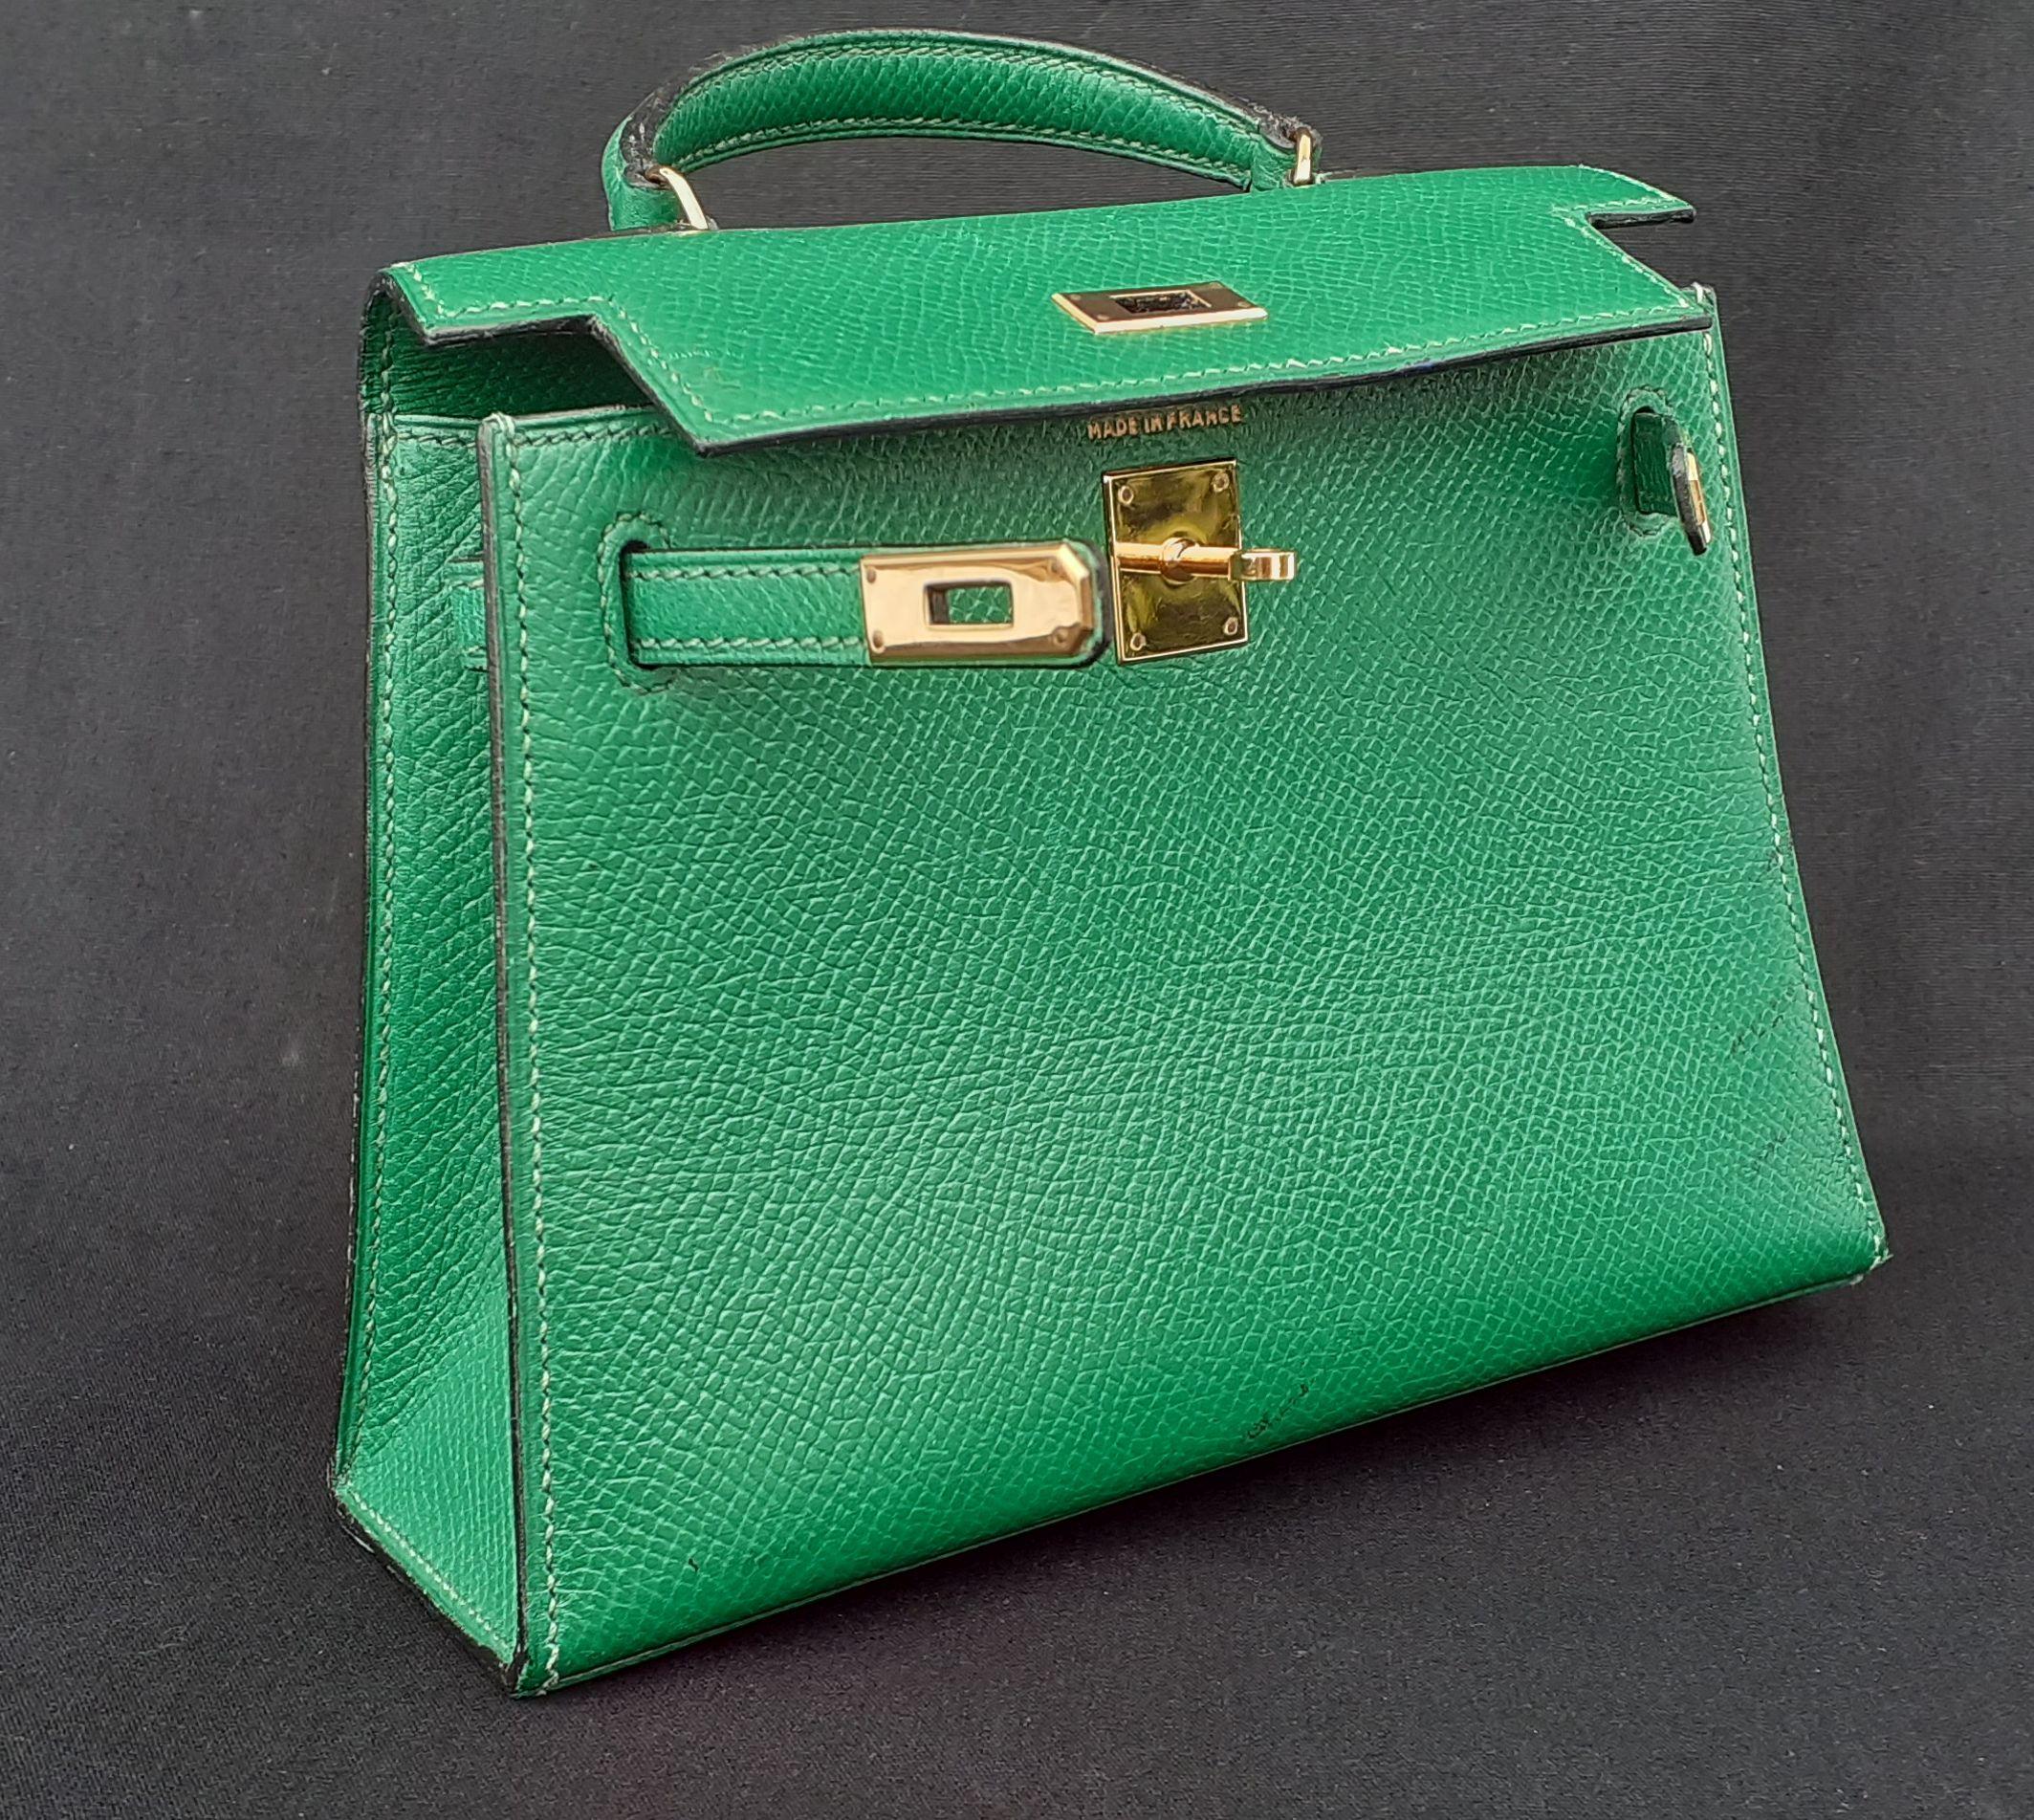 Exceptional Hermès Vintage Micro Kelly 15 cm Sellier Bag Green Leather Gold Hdw 9